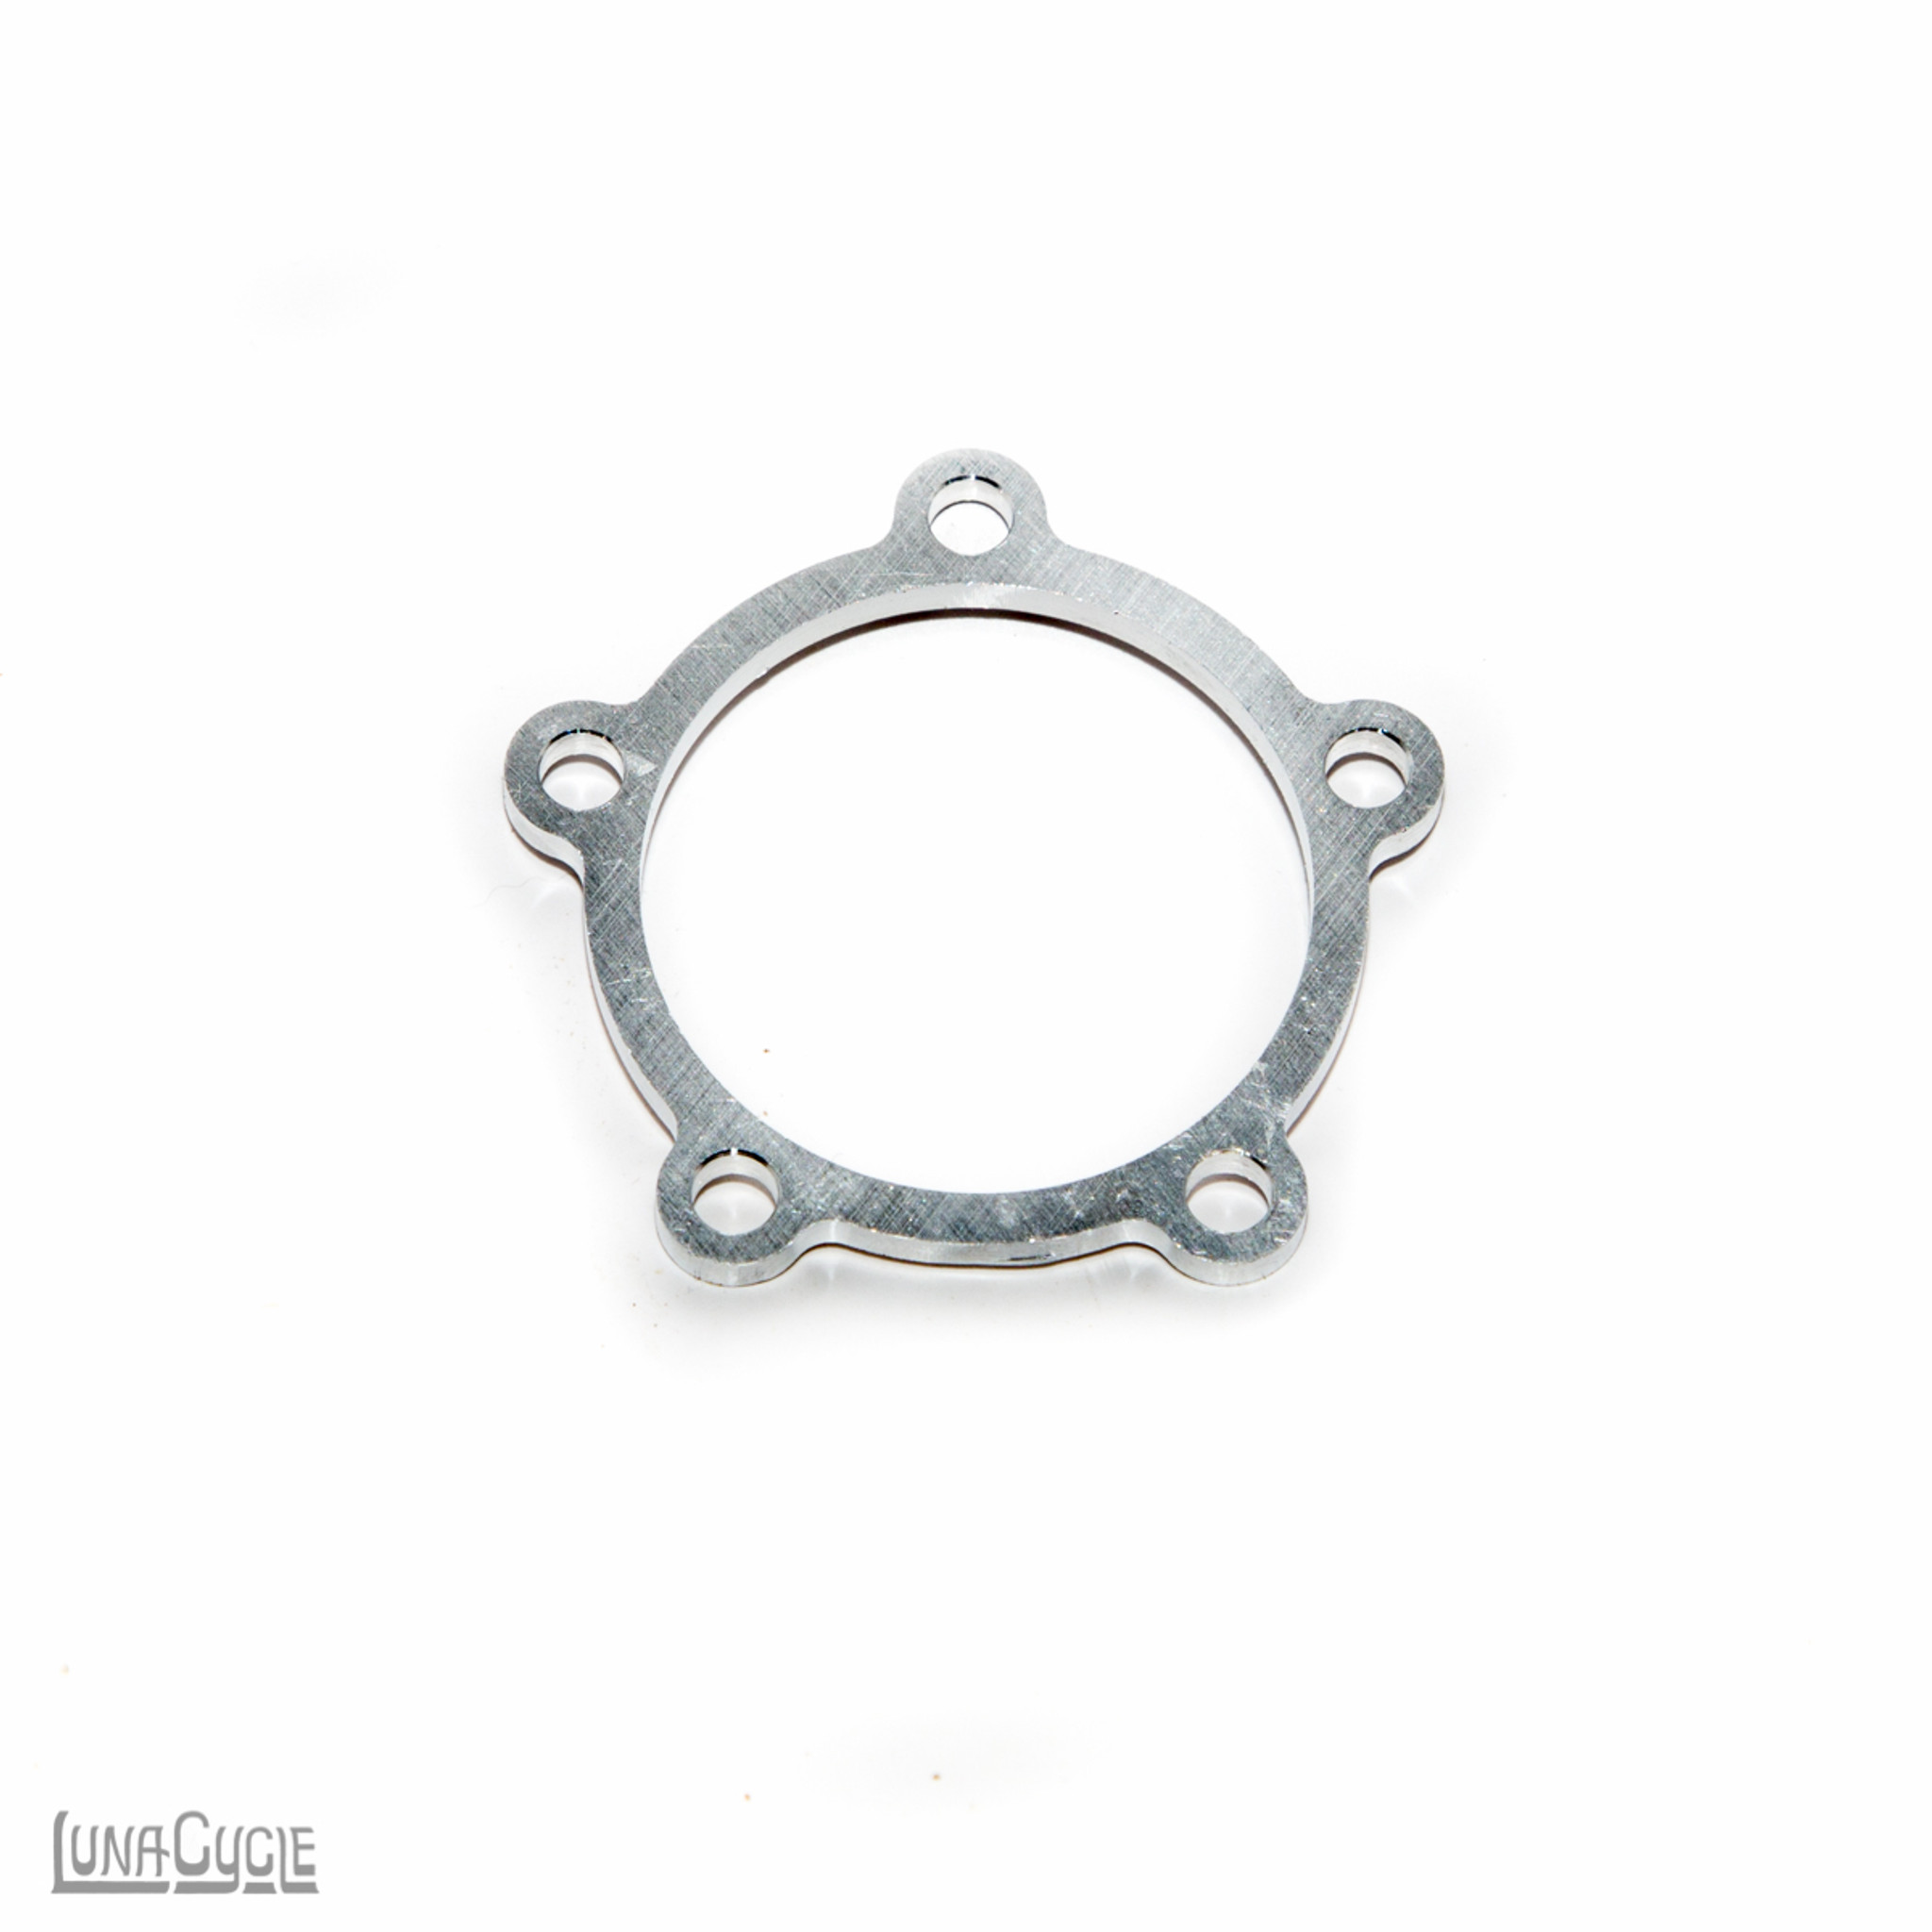 Luna Chain Ring Spacer for the Bafang HD - Luna Cycle